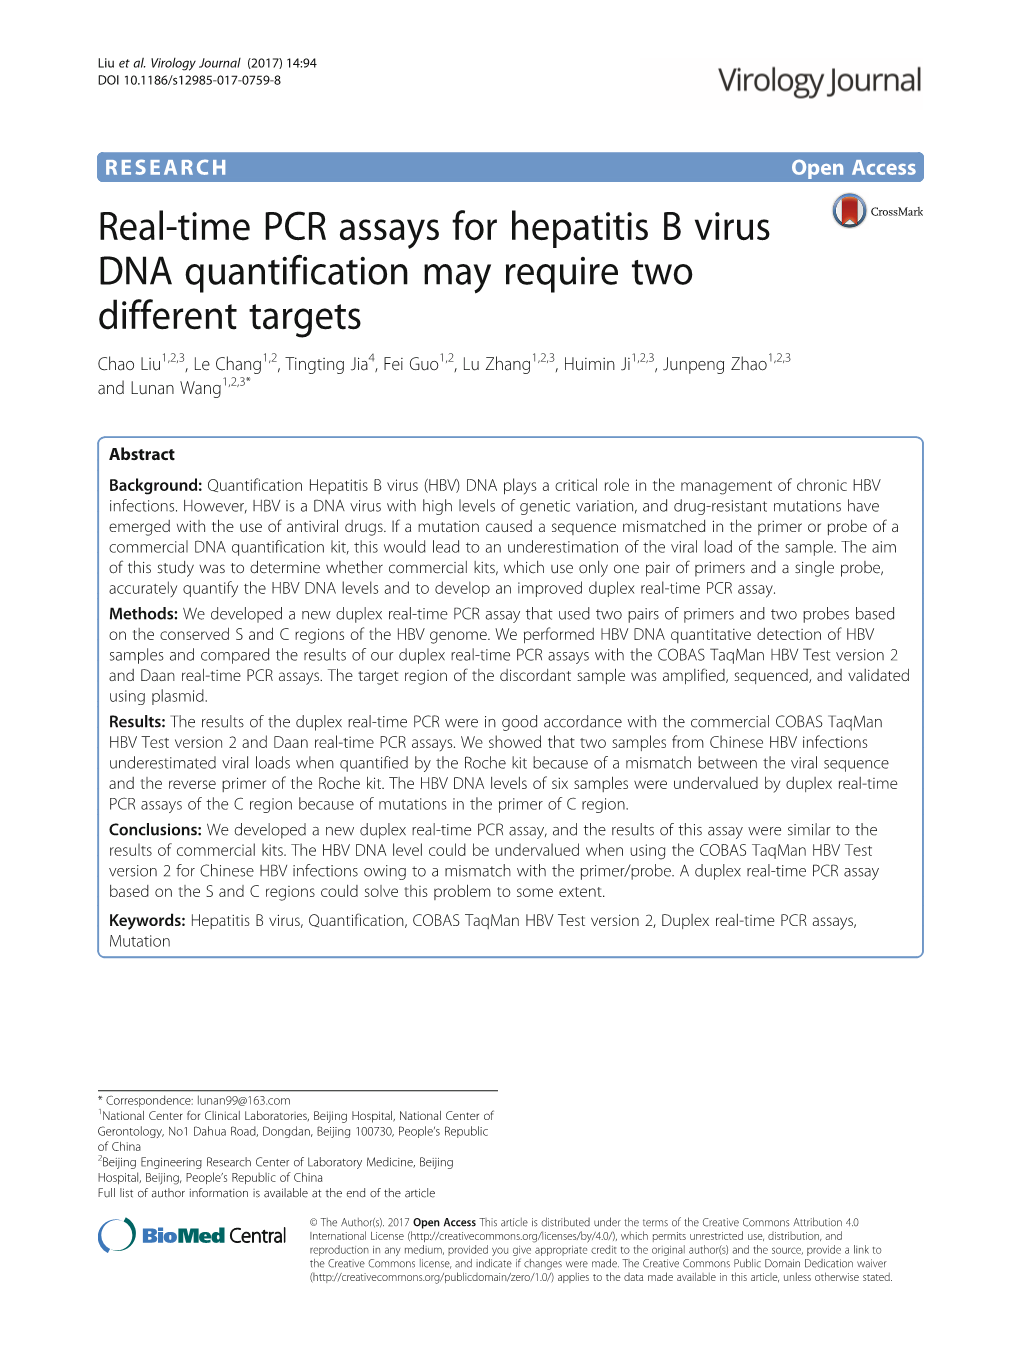 Real-Time PCR Assays for Hepatitis B Virus DNA Quantification May